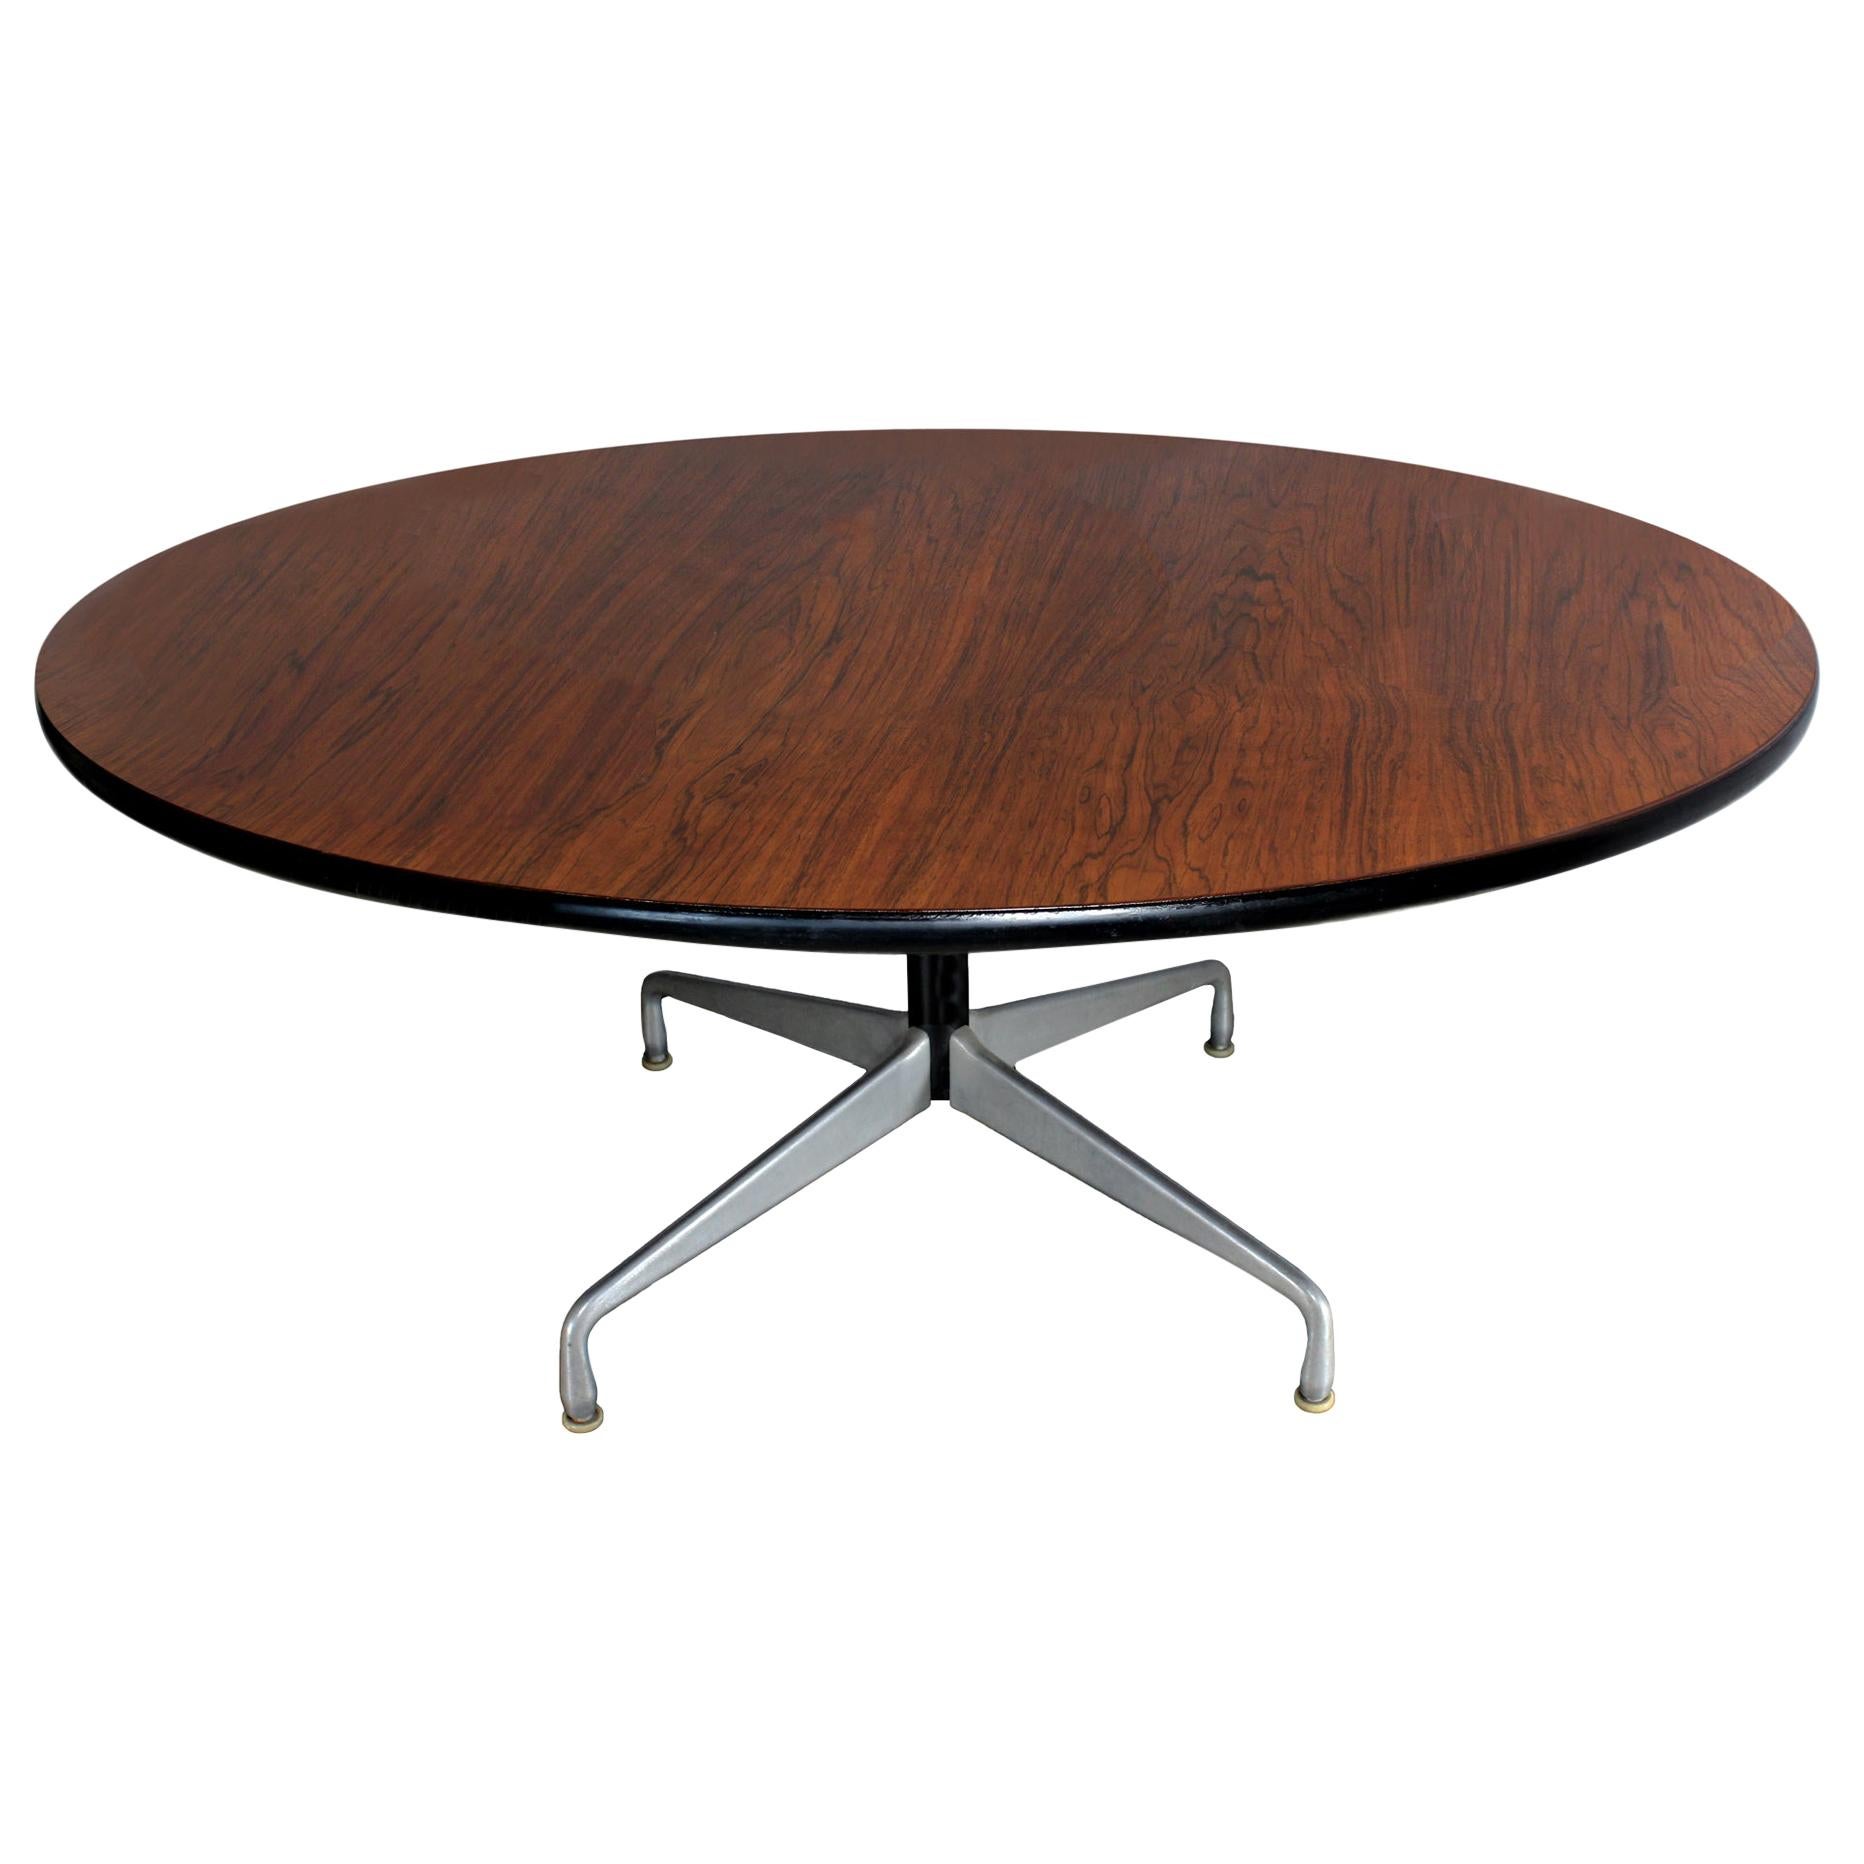 Eames Round Rosewood Table with Original Accessories